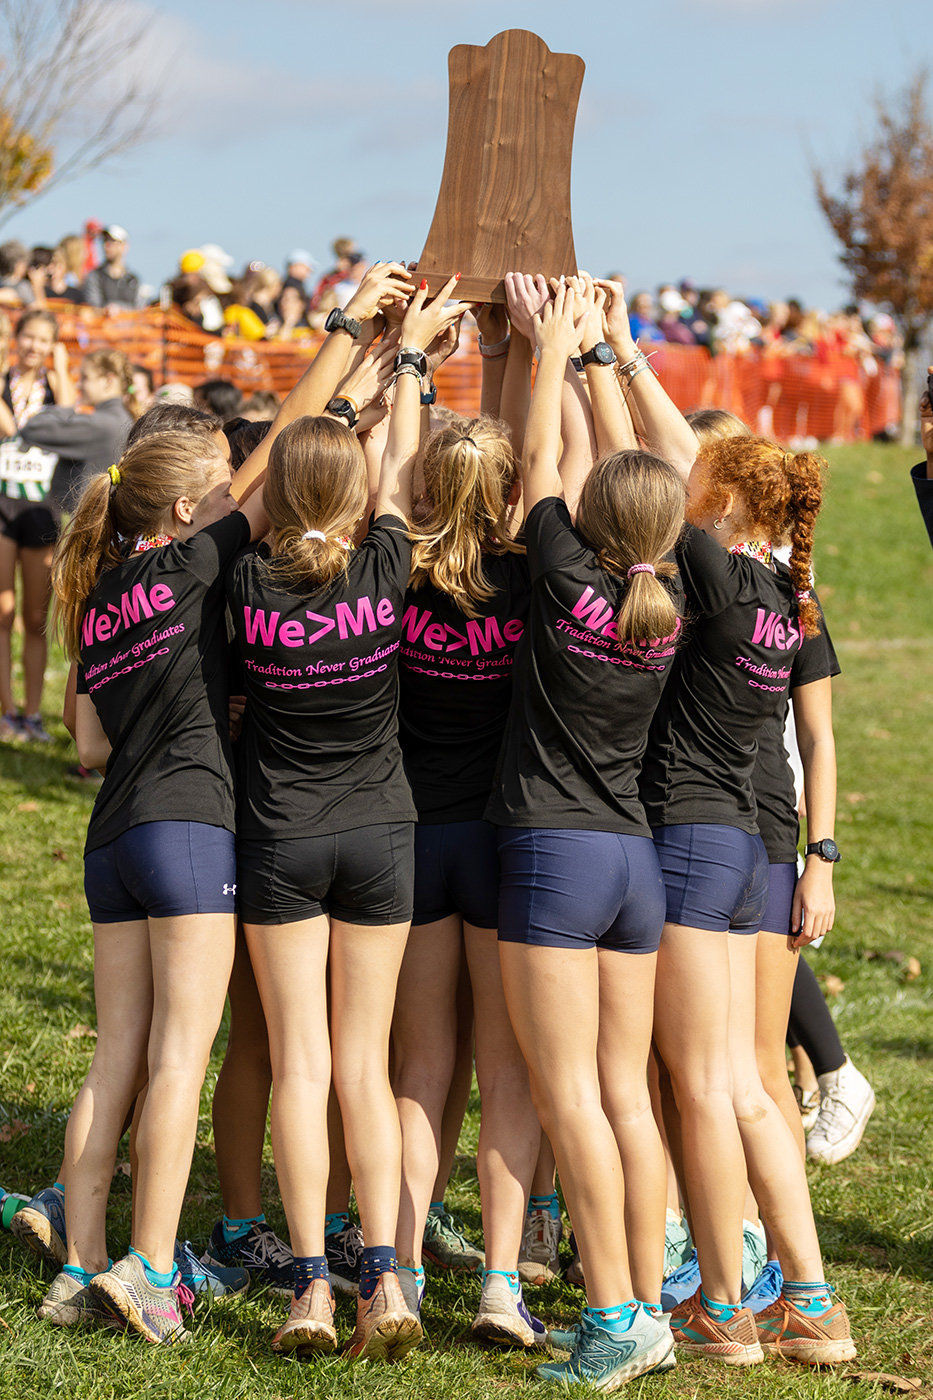 After winning the state championship, the Severna Park girls hoisted the trophy while wearing shirts saying, “We > Me.”